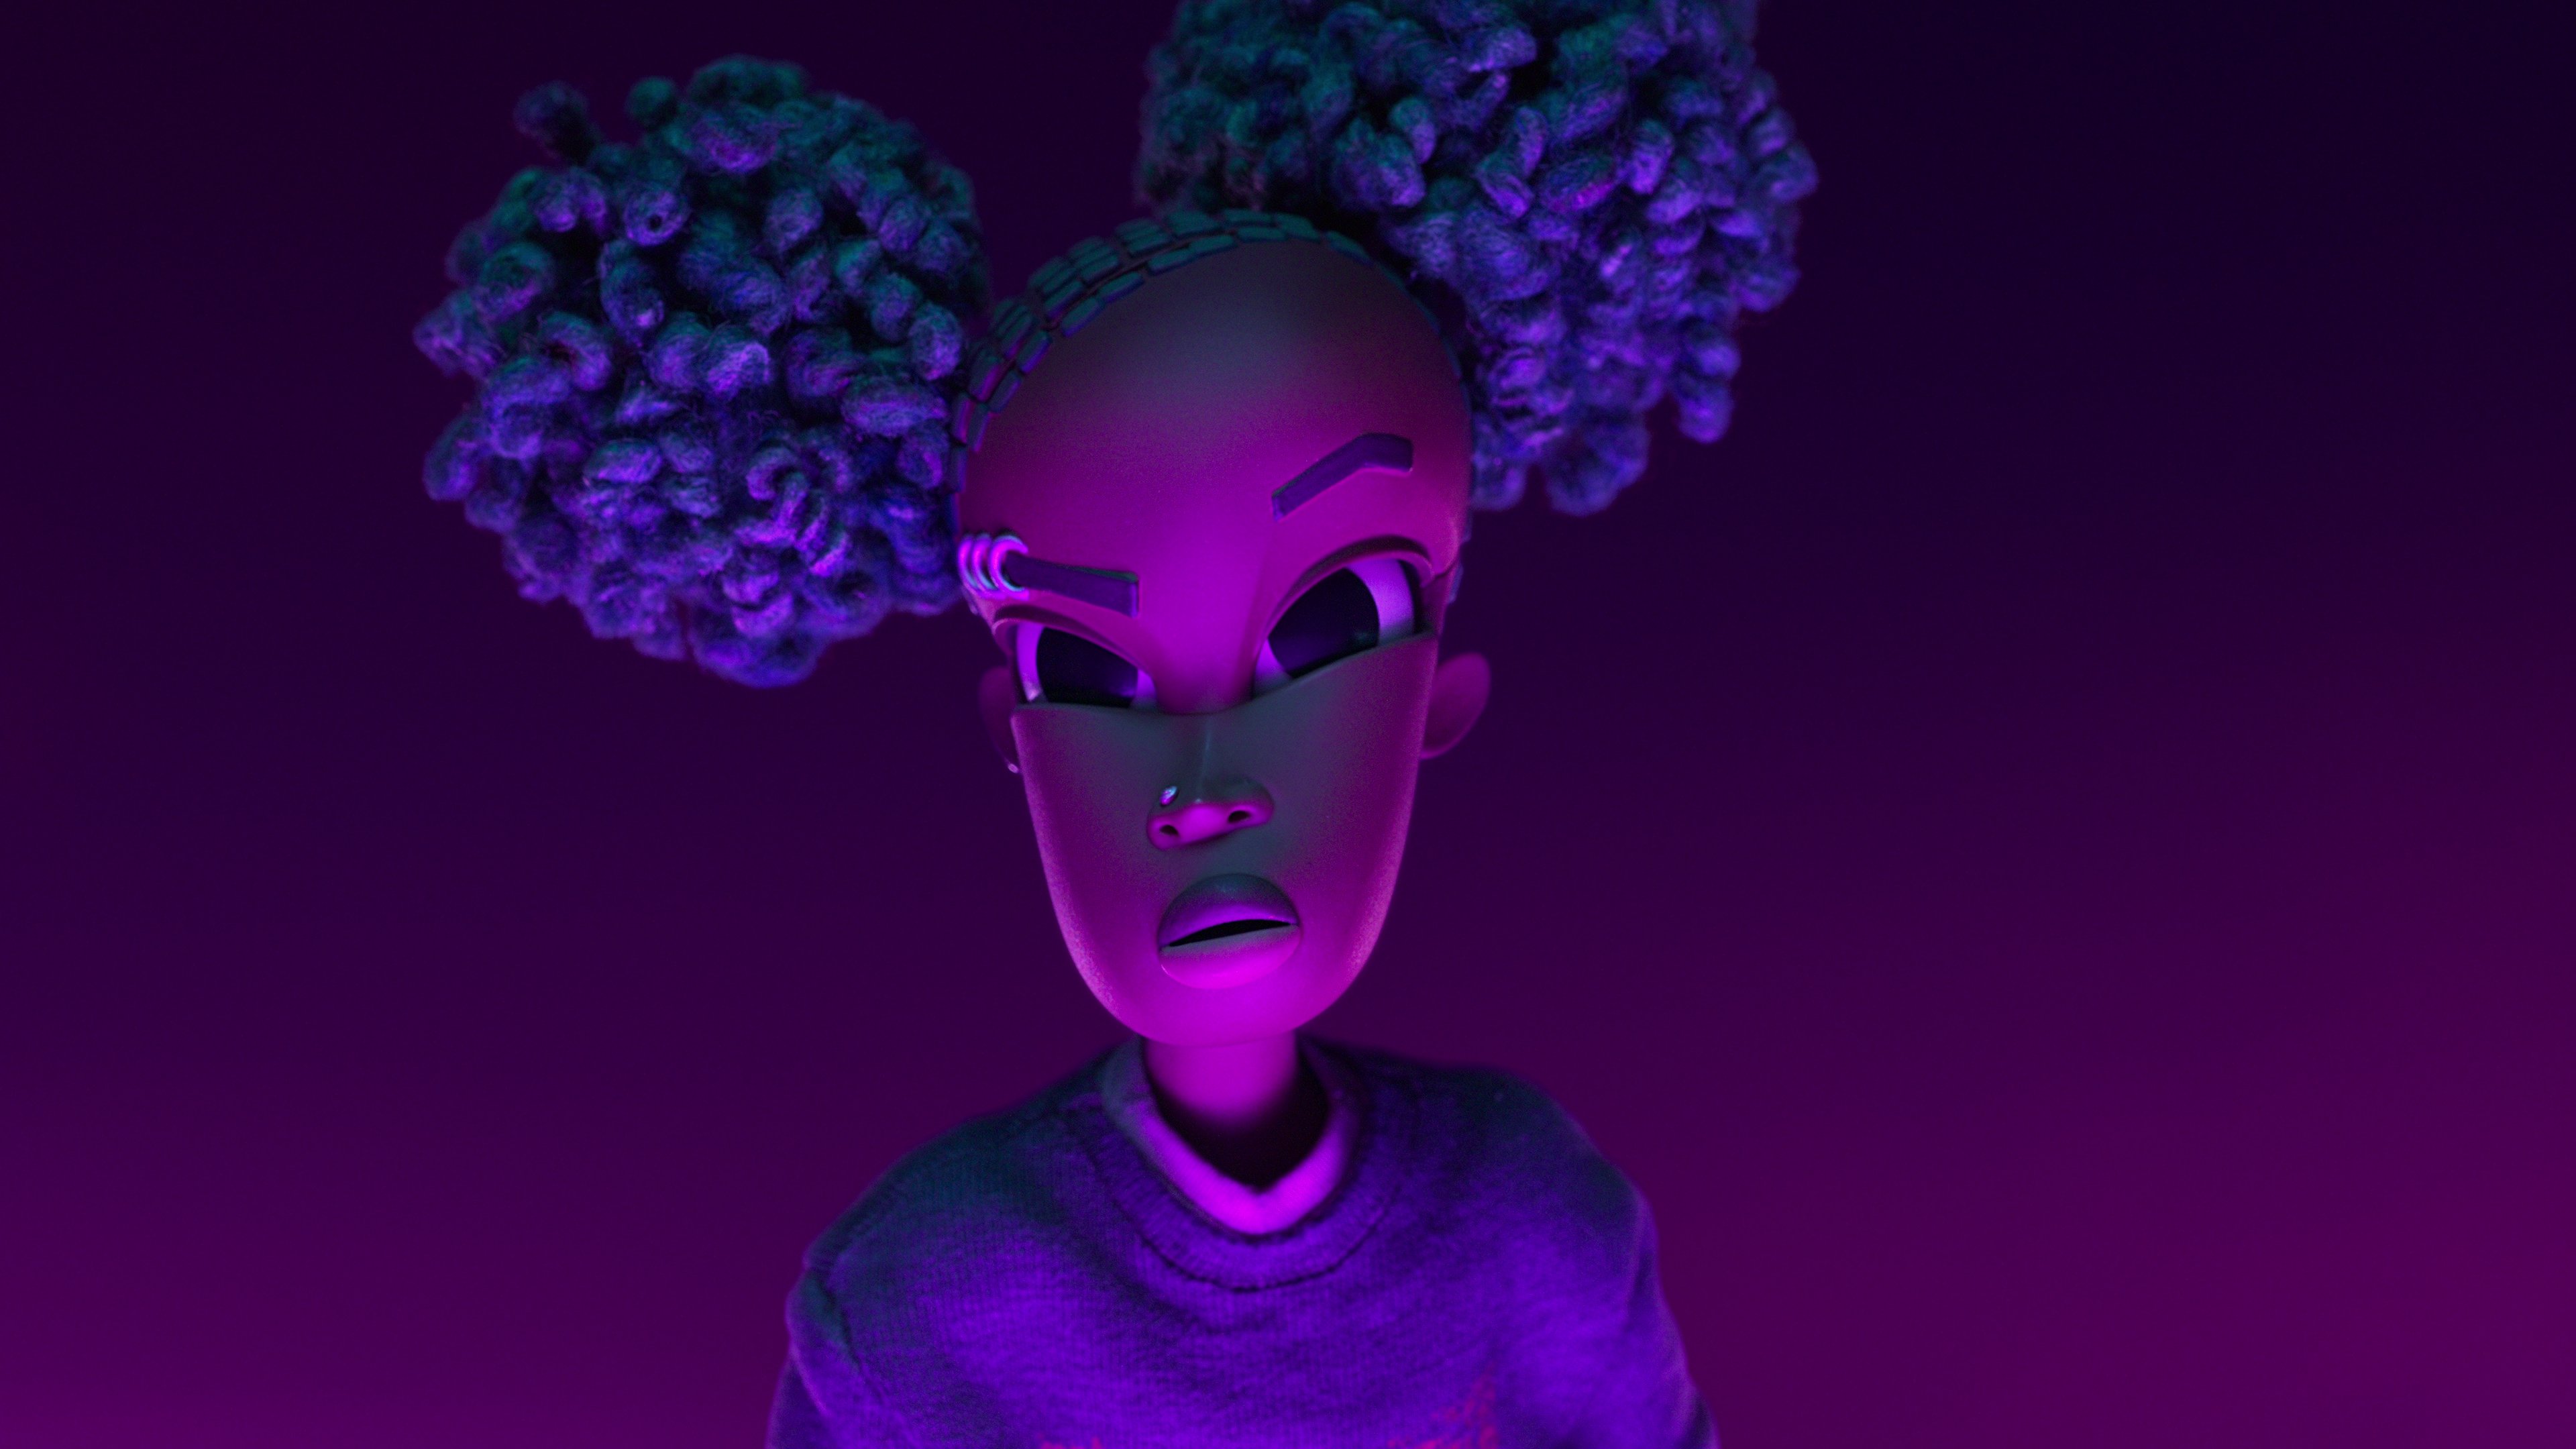 A young Black girl in front of a purple background raises an eyebrow.